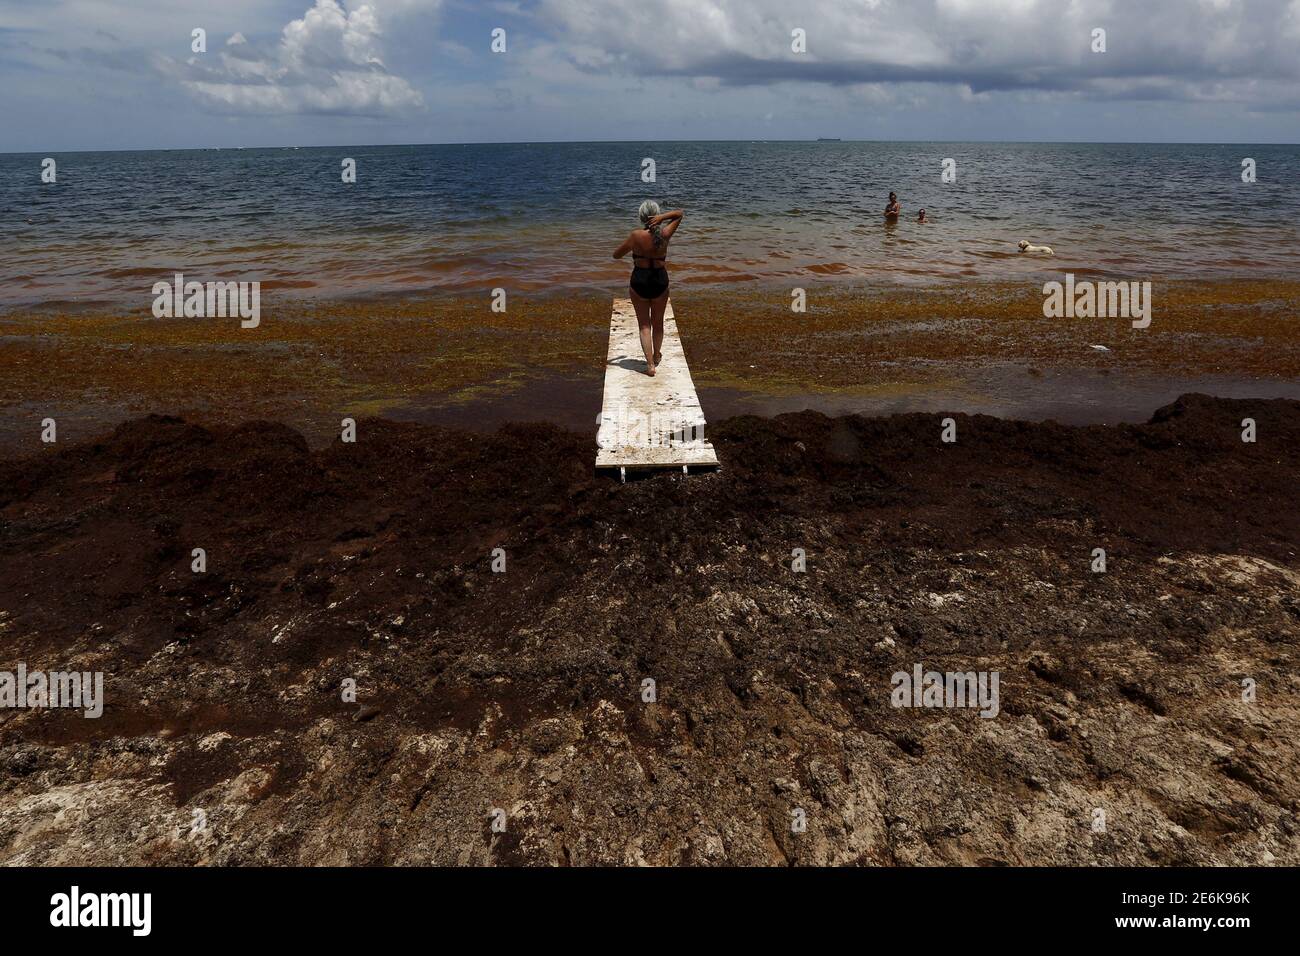 A woman walks on a makeshift bridge near Sargassum algae in Puerto Morelos, near Cancun, August 11, 2015. The Sargassum algae contains biting sand fleas and releases a pungent smell as it decomposes. It has choked beaches in resorts throughout the Caribbean including Cancun this season, prompting local authorities to launch a large-scale clean-up operation.  REUTERS/Edgard Garrido PICTURE 11 OF 34 FOR WIDER IMAGE STORY 'EARTHPRINTS: CANCUN'SEARCH 'EARTHPRINTS CANCUN' FOR ALL IMAGES Stock Photo